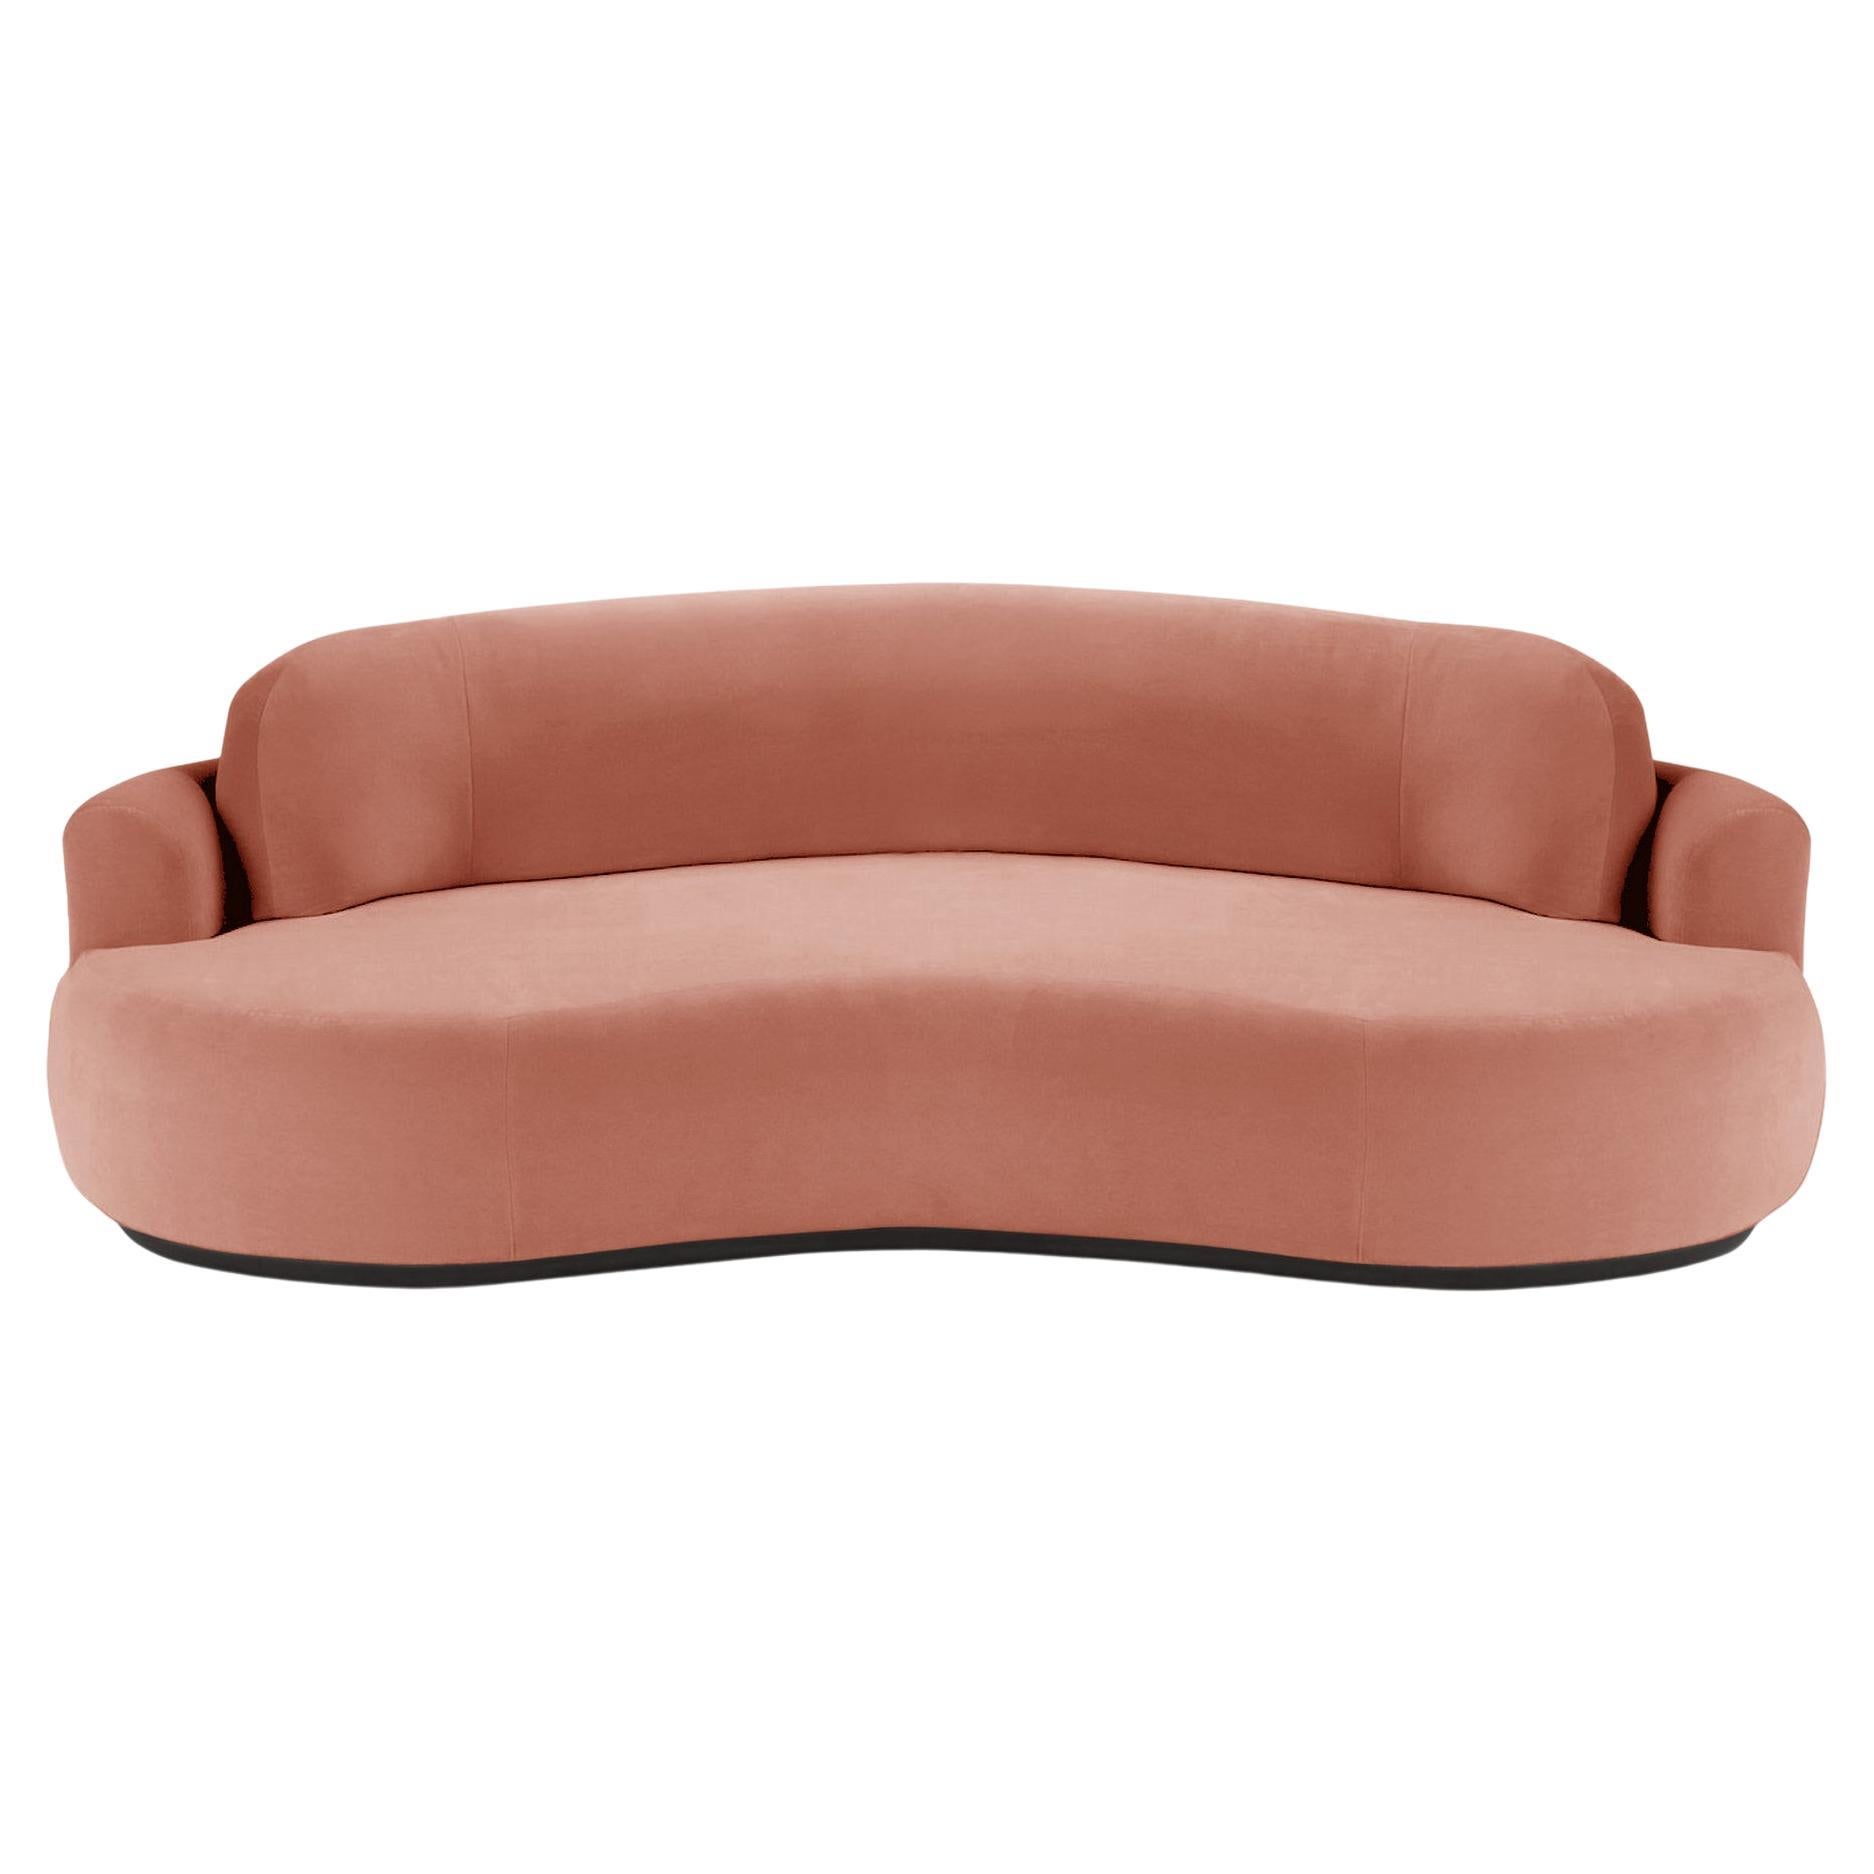 Naked Round Sofa, Large with Beech Ash-056-5 and Paris Brick